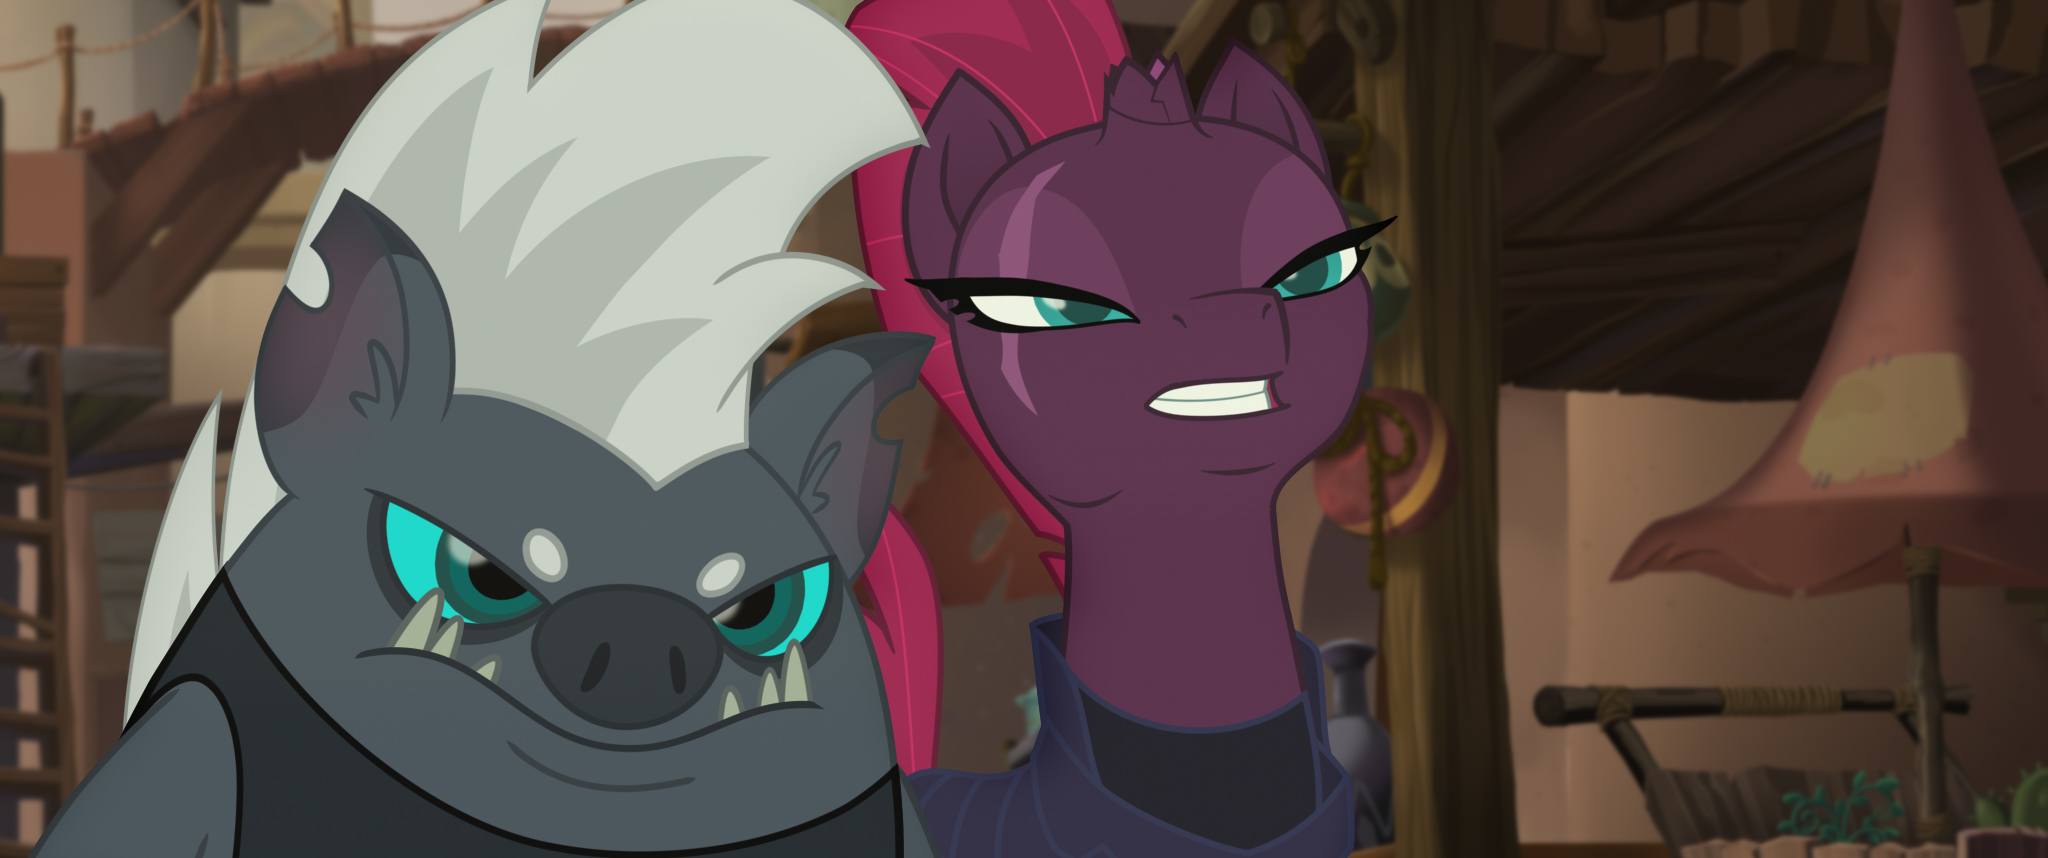 GRUBBER (Michael Peña) and TEMPEST SHADOW (Emily Blunt) in MY LITTLE PONY: THE MOVIE.